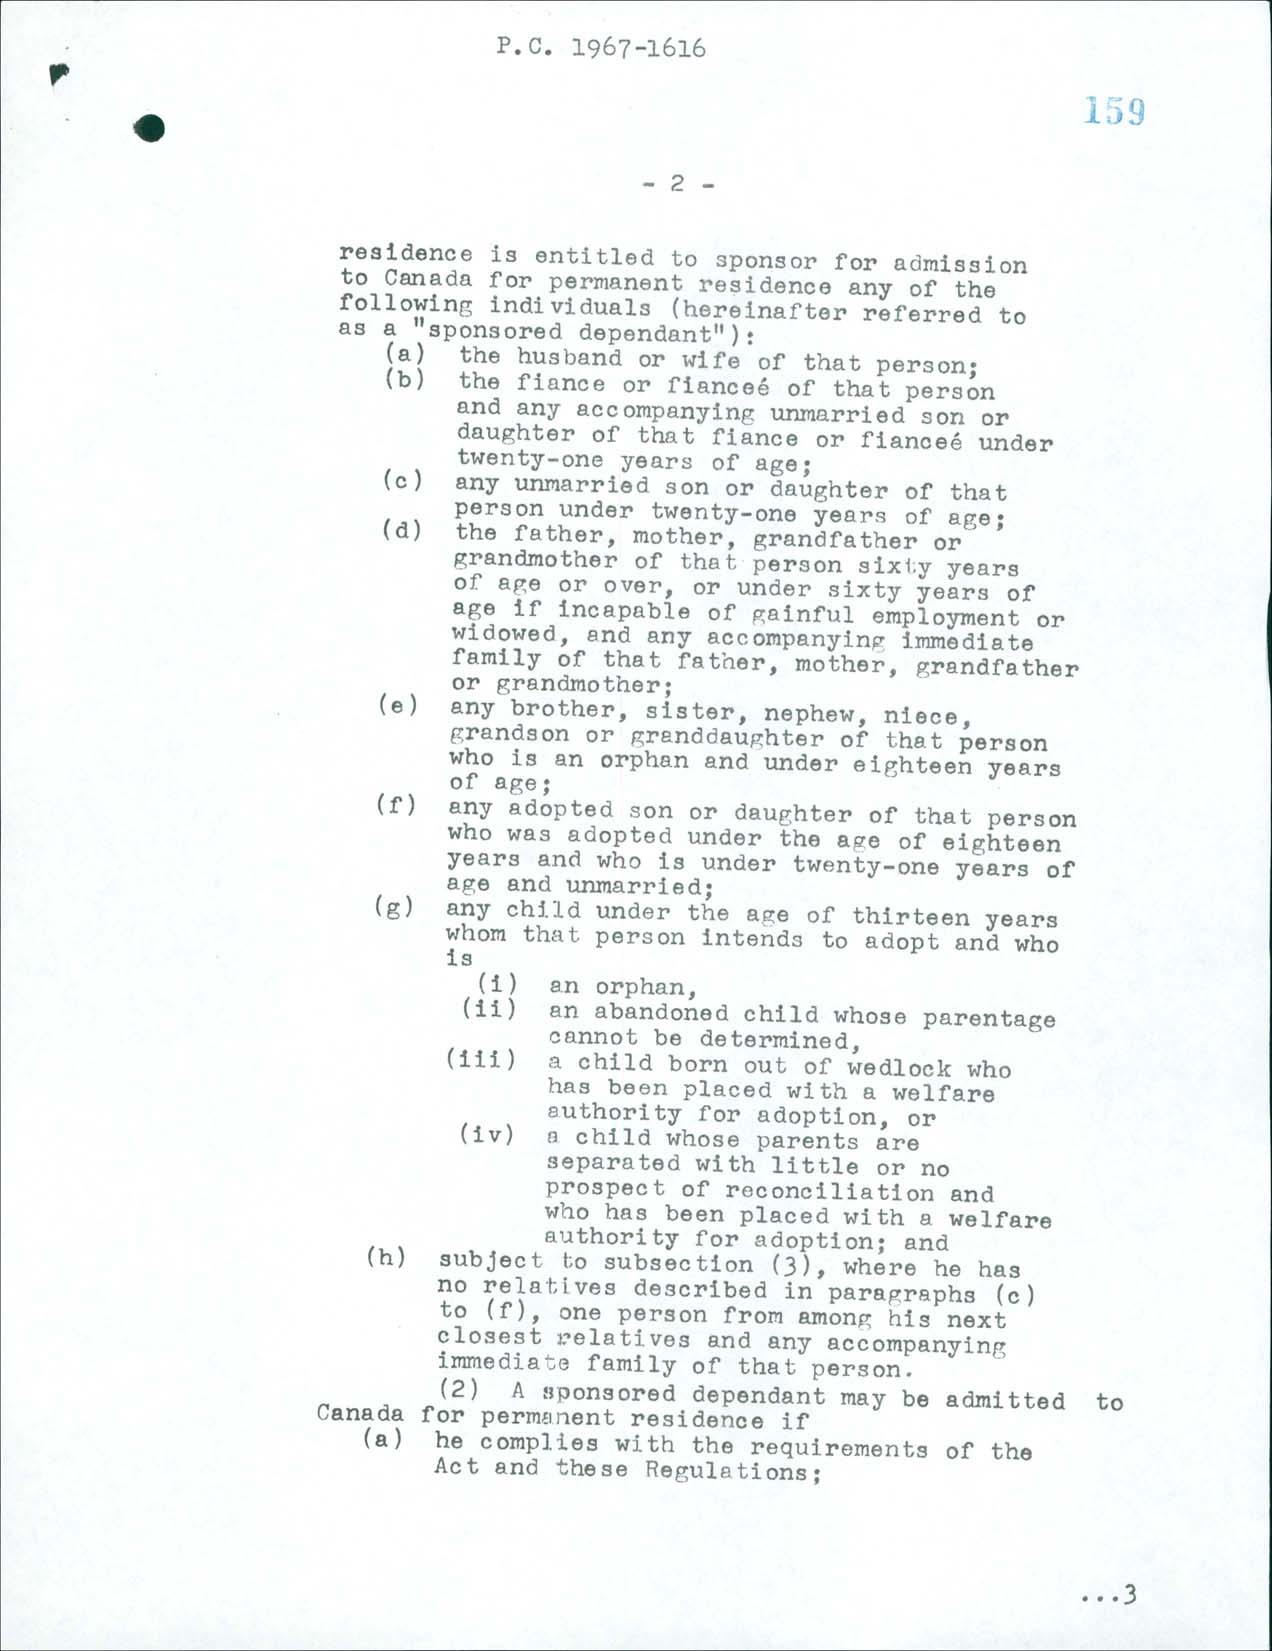 Page 2 Immigration Regulations, Order-in Council PC 1967-1616, 1967